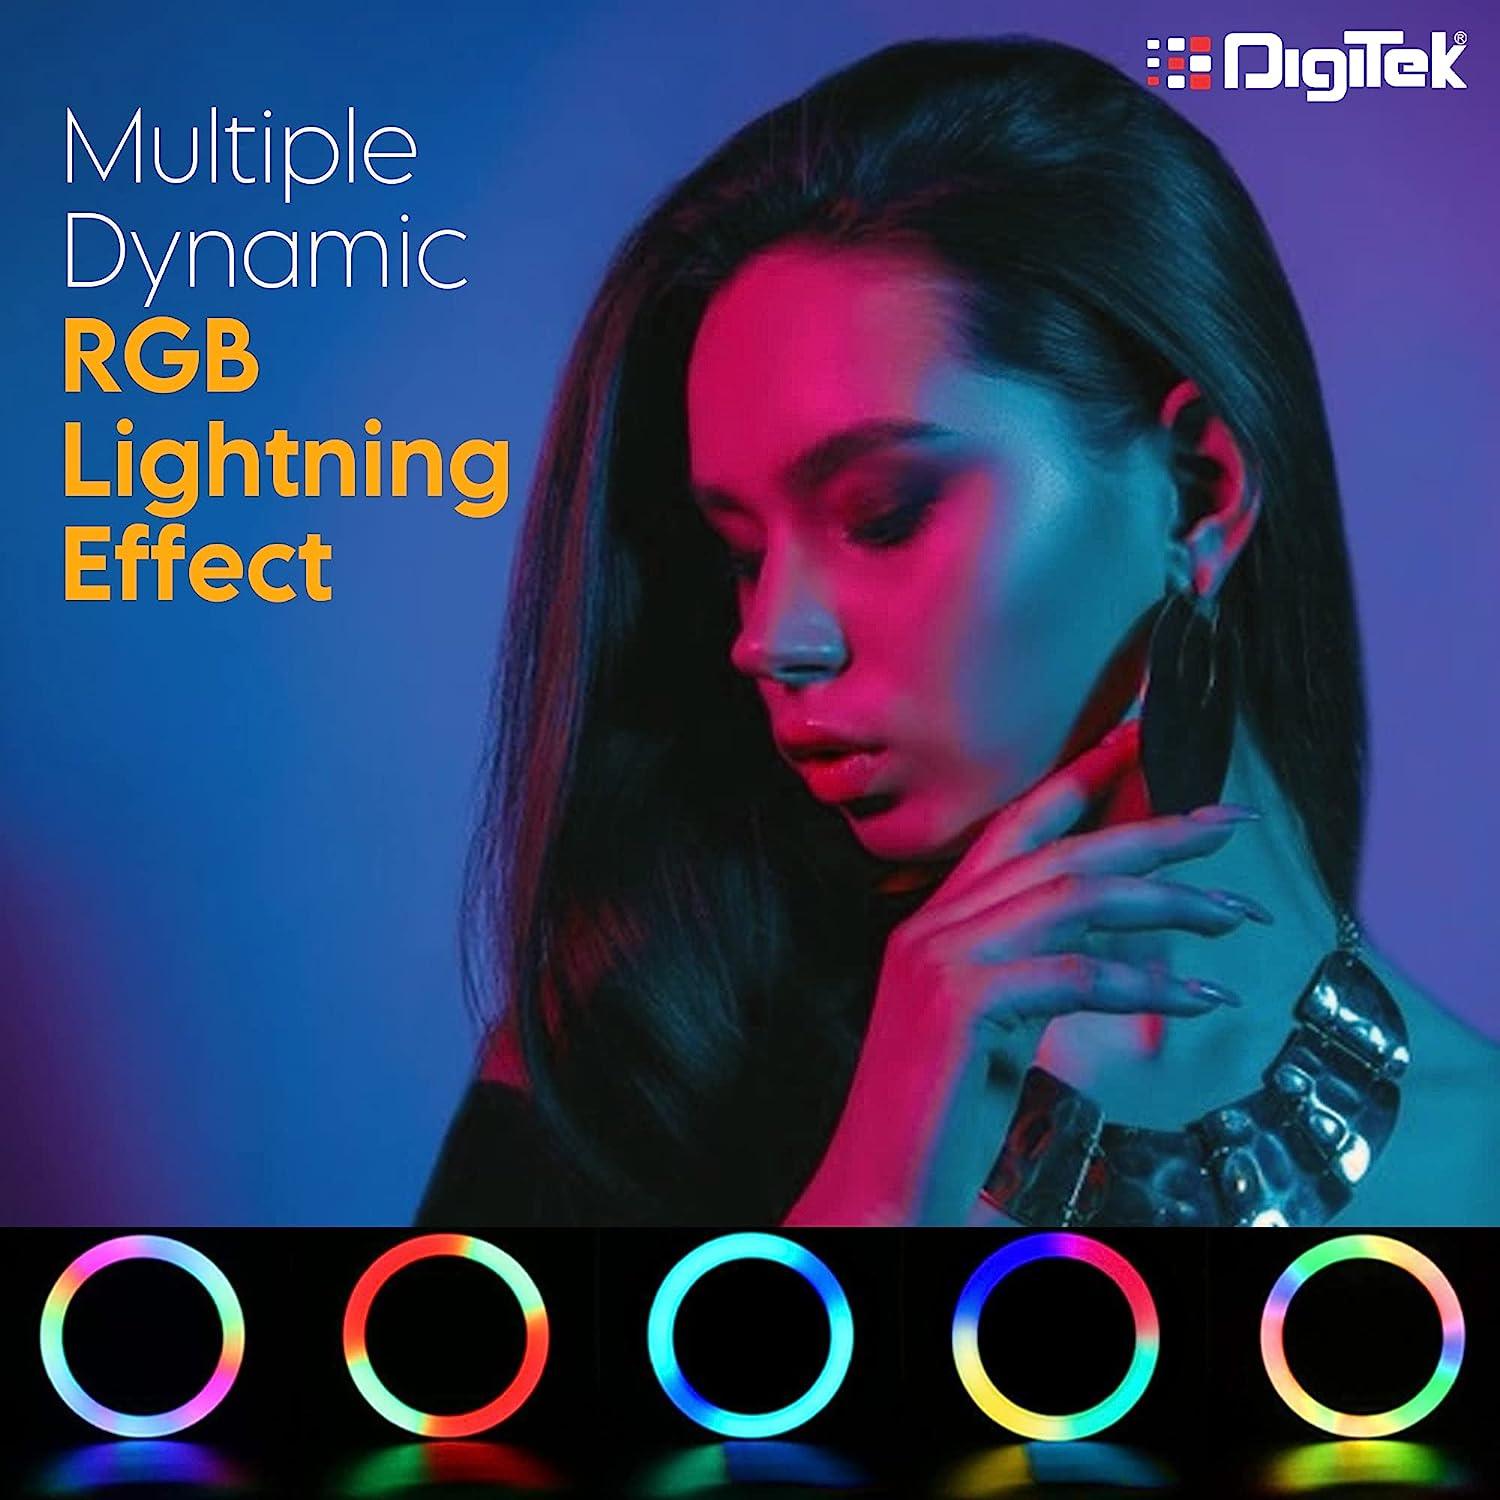 Digitek (DRL-15C RGB) LED RGB Ring Light with Stand for YouTube, Photo-Shoot, Video Shoot, Live Stream, Makeup & More, Compatible with iPhone/Android Phones & Camera - Digitek